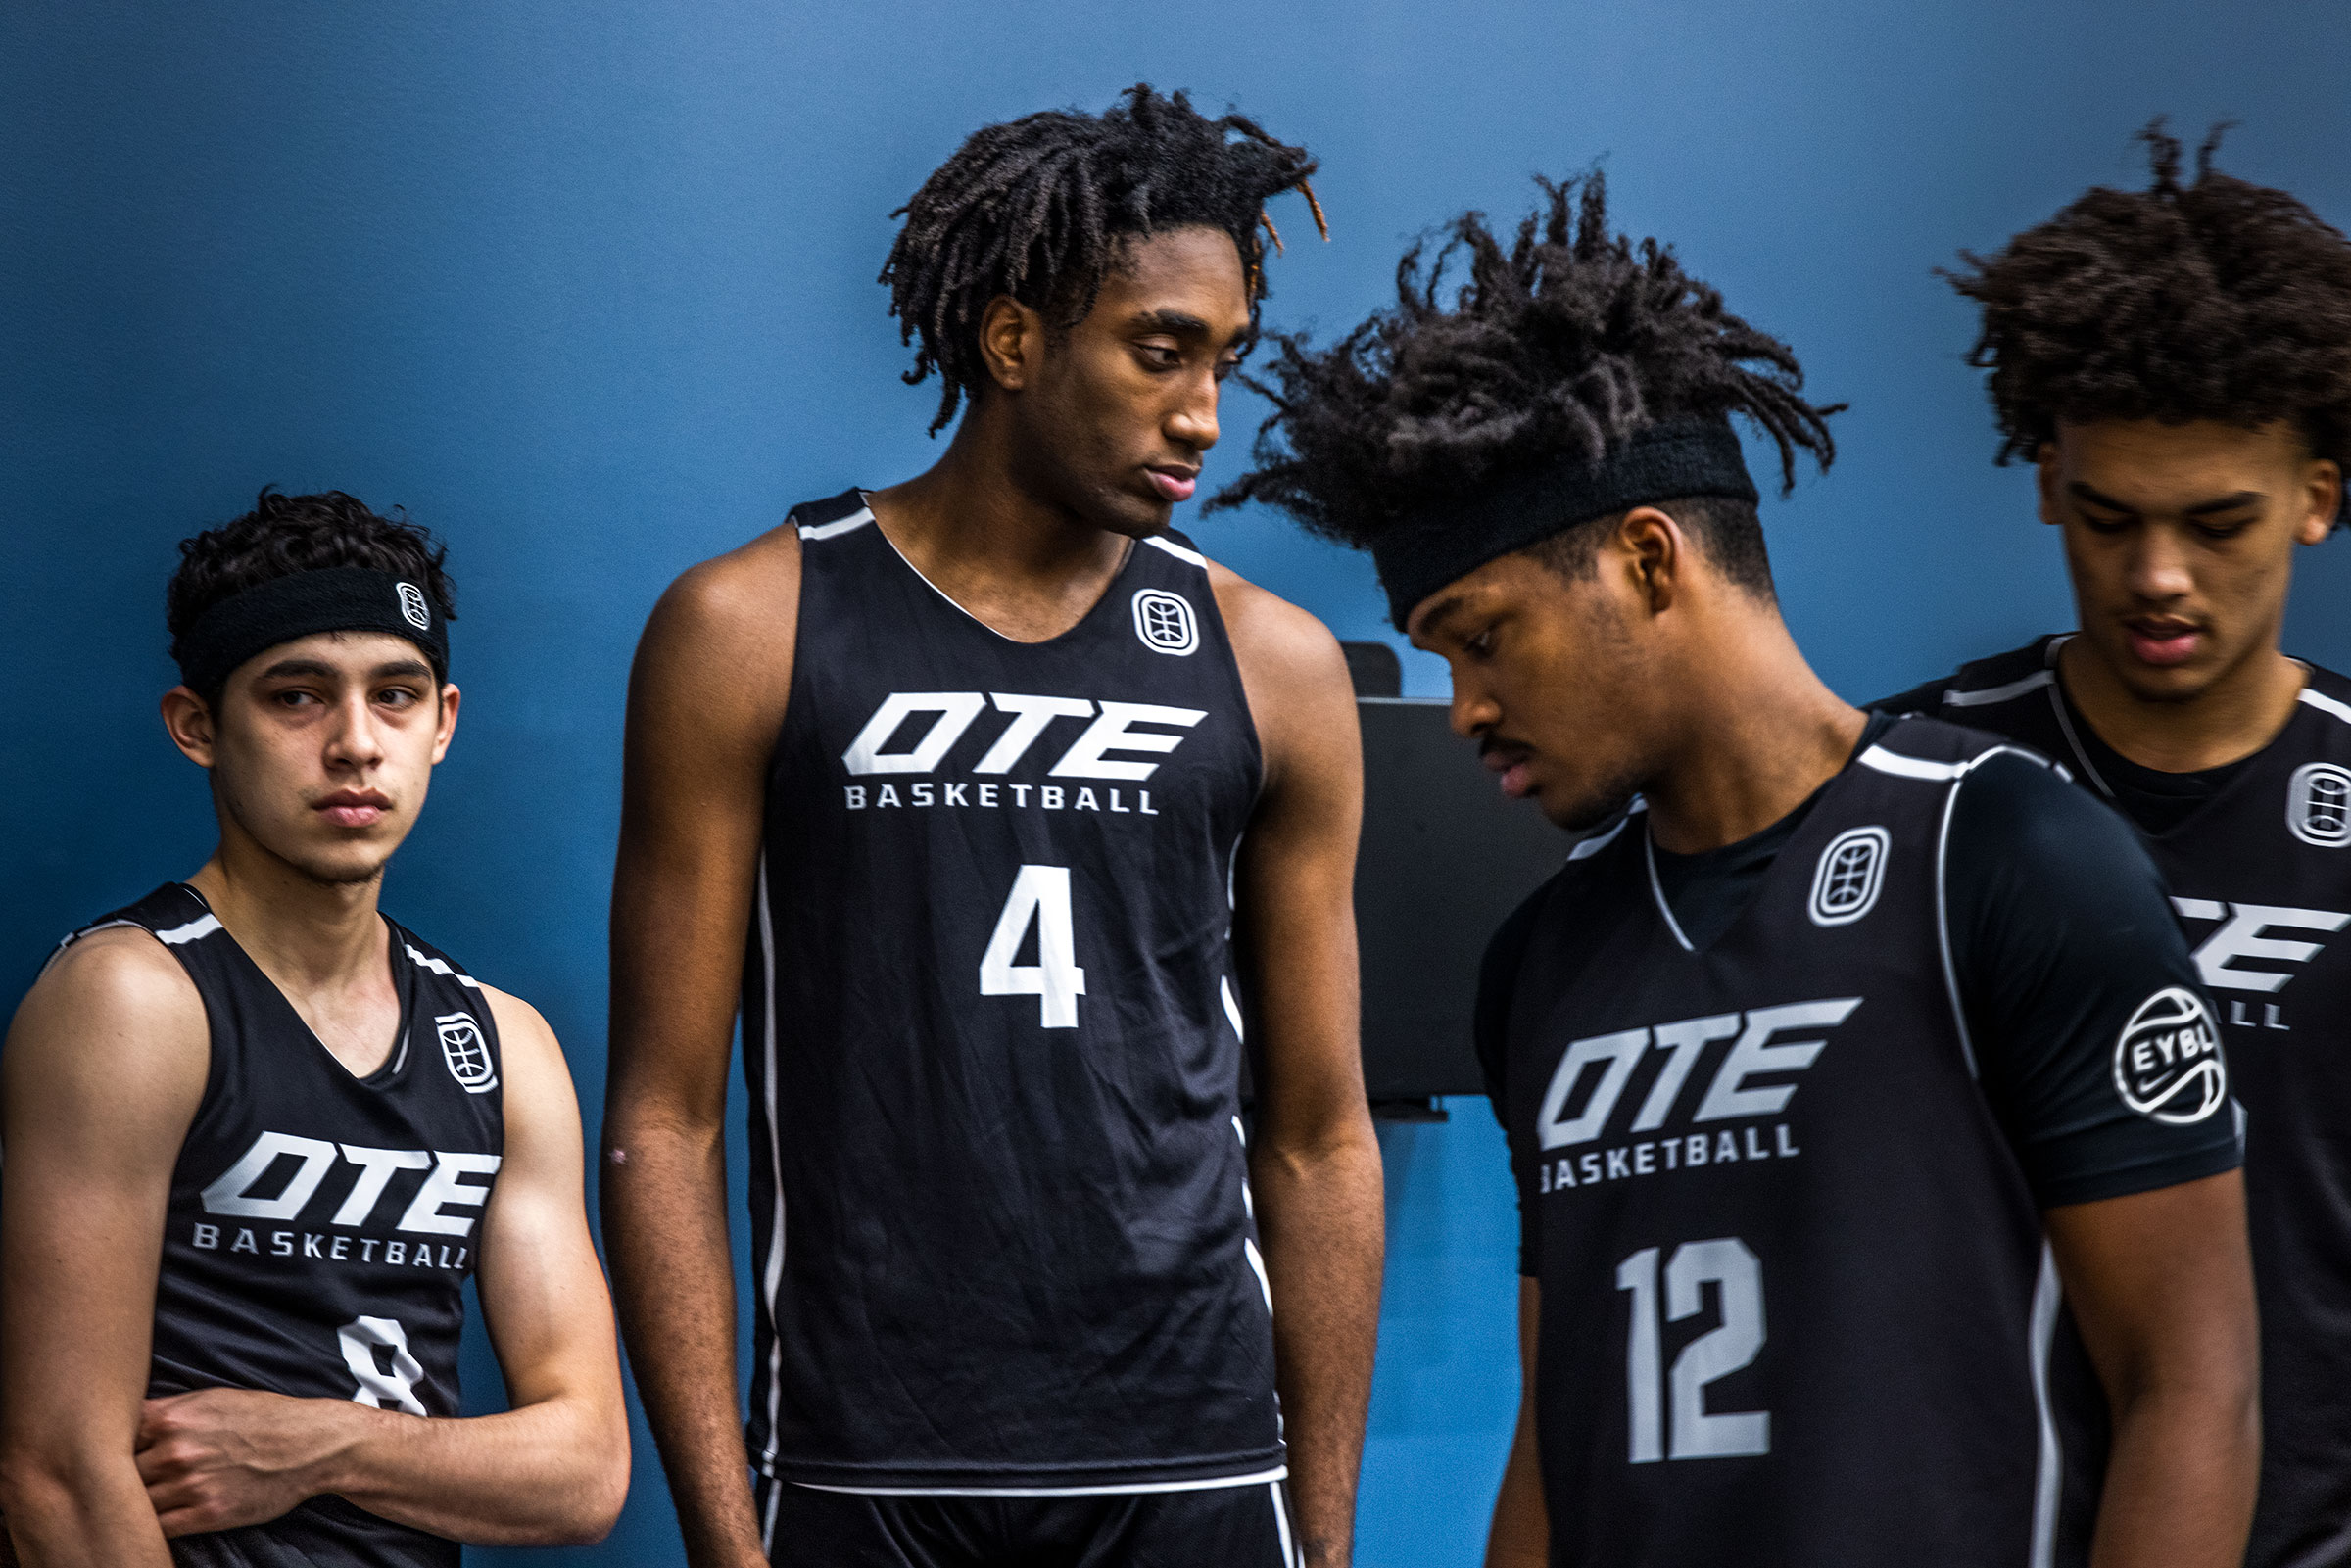 Emmanuel Maldonado, Ryan Bewley, Bryce Griggs, Jalen Lewis of Overtime Elite taking a quick break from warm ups at the practice courts at the OTE arena. (Andrew Hetherington for TIME)